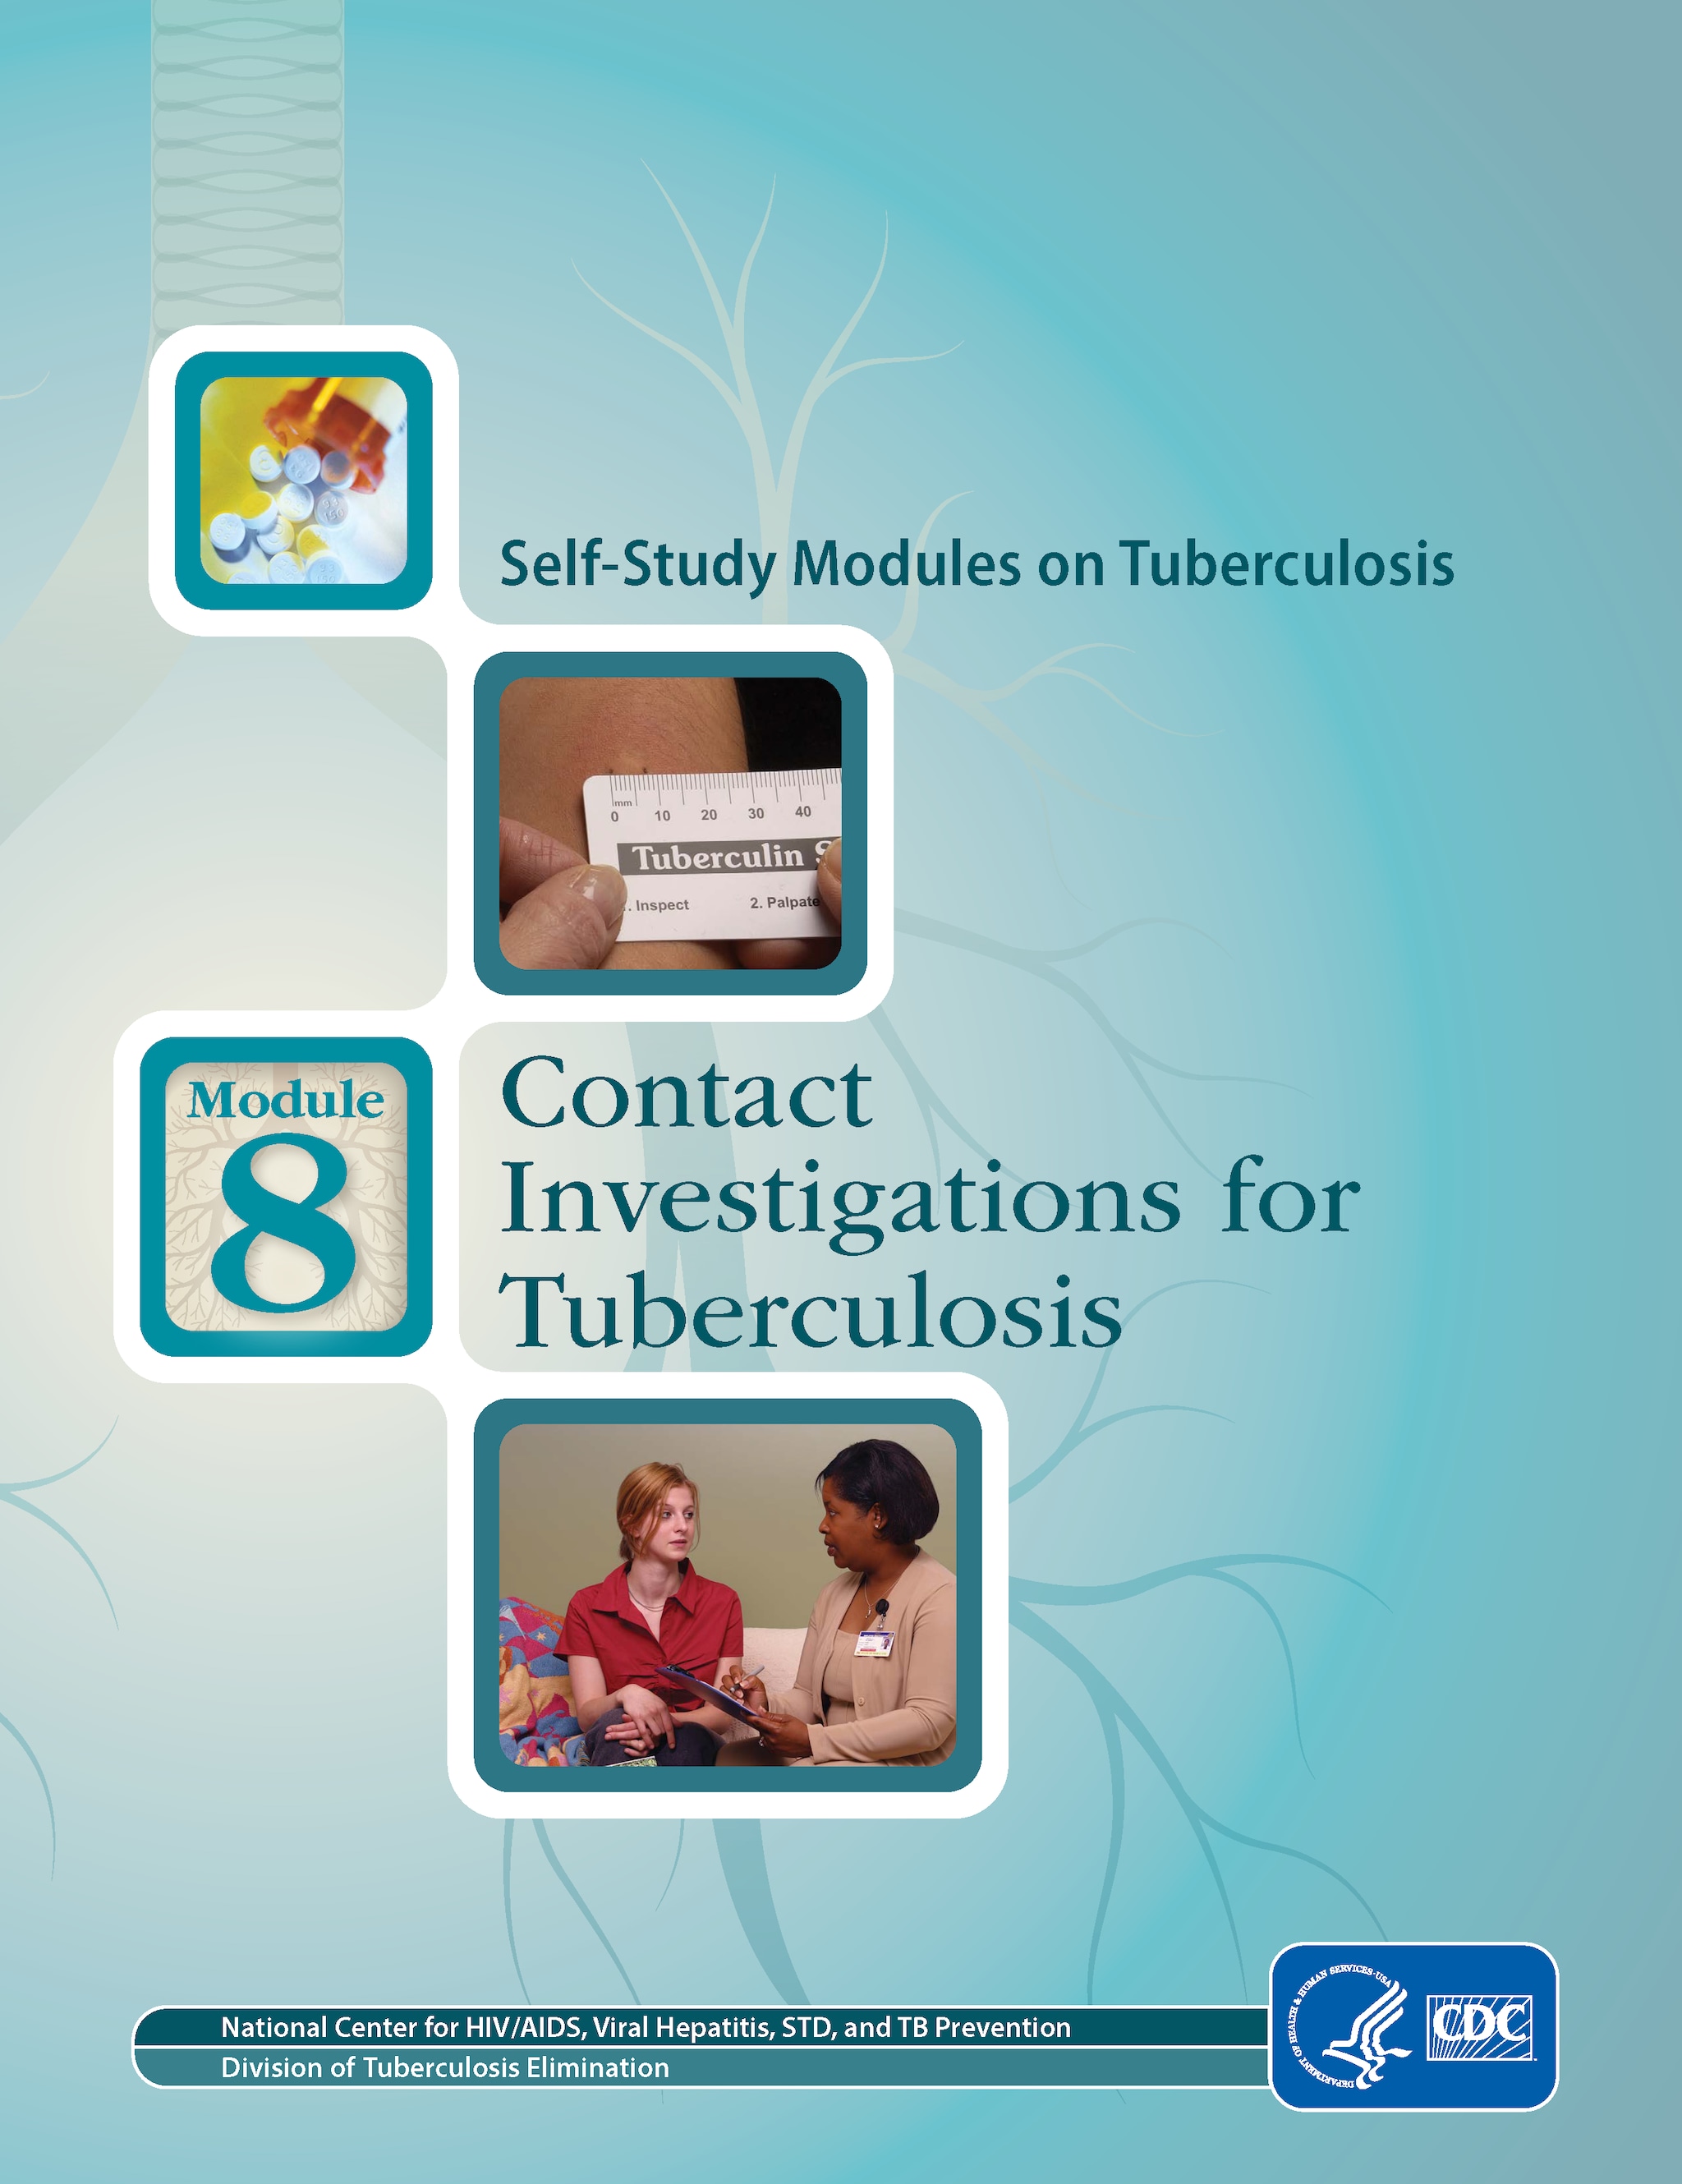 Self-Study Module 8: Contact Investigations for Tuberculosis